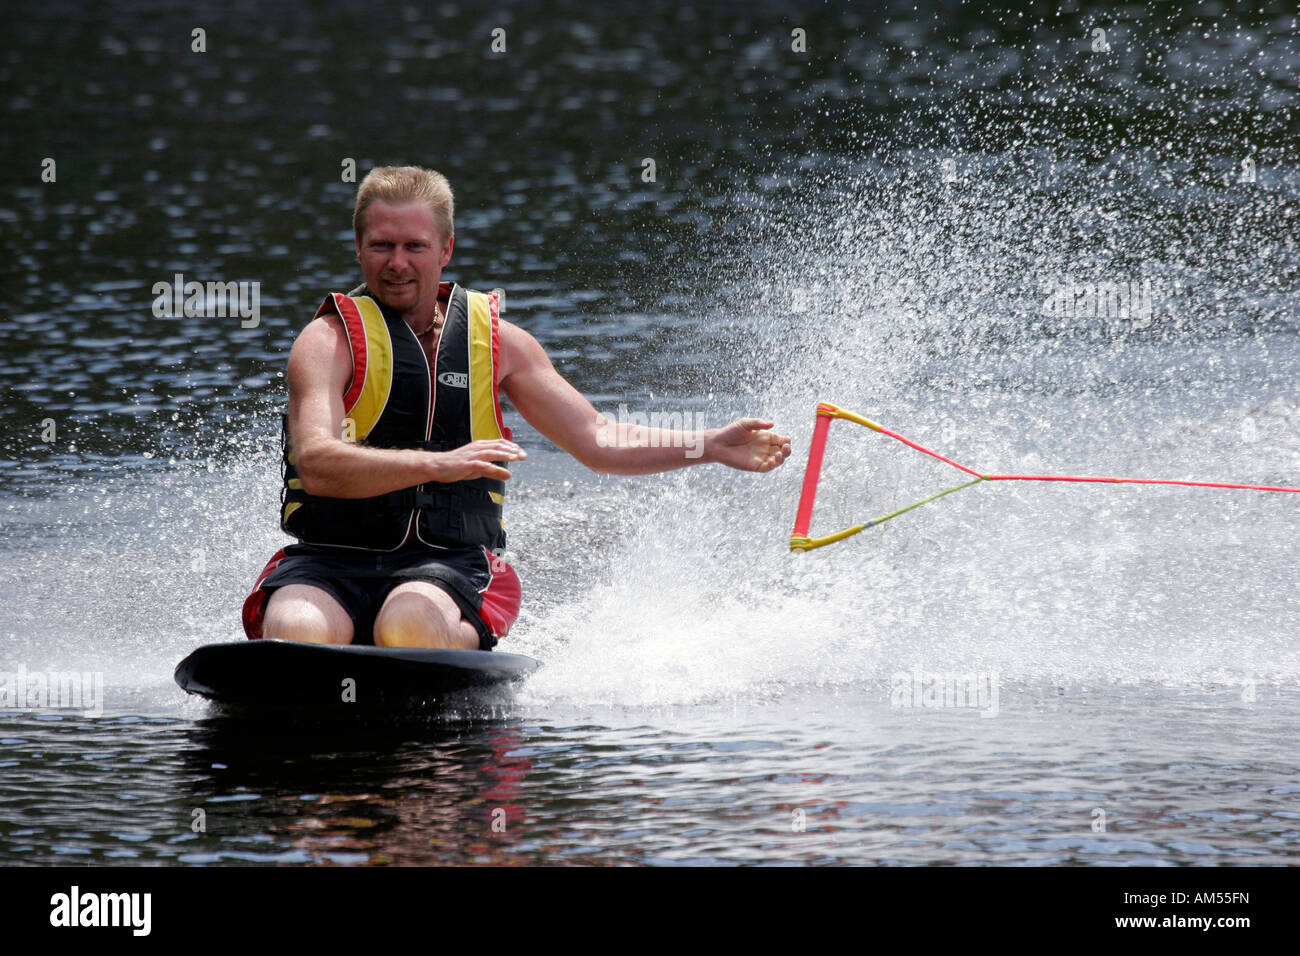 A young man enjoying his vacation on a lake riding a knee board